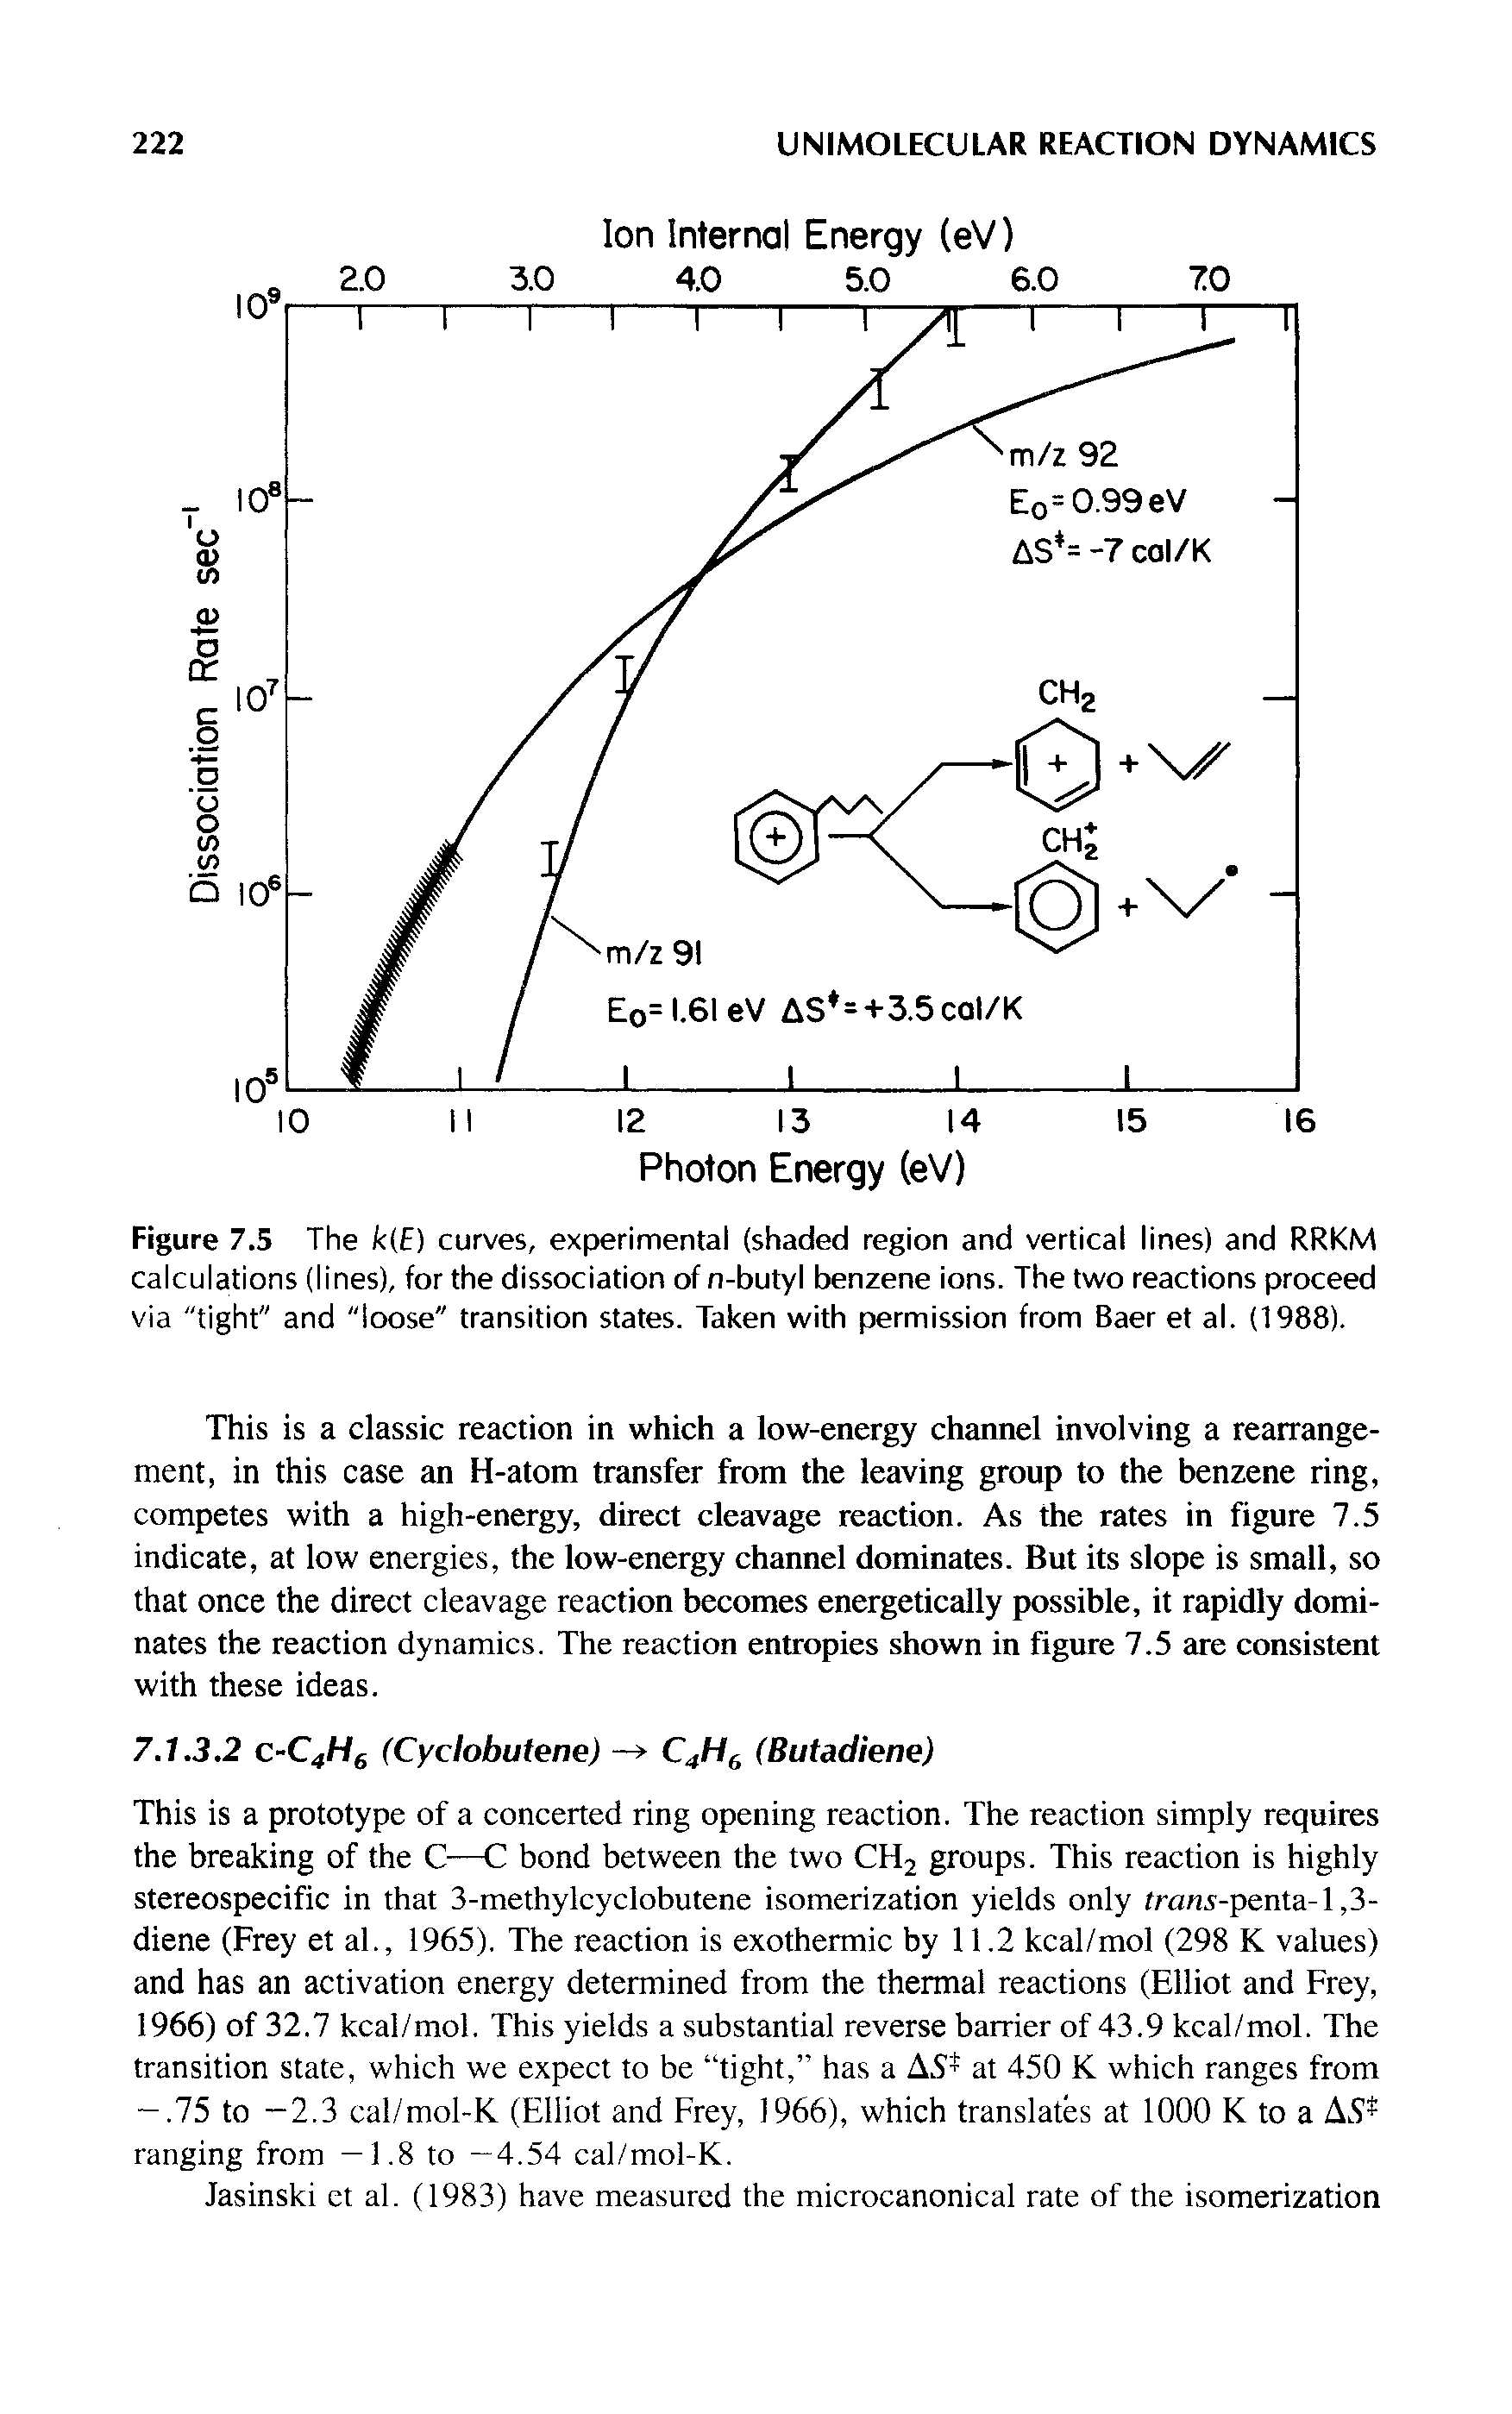 Figure 7.5 The k(E) curves, experimental (shaded region and vertical lines) and RRKM calculations (lines), for the dissociation of n-butyl benzene ions. The two reactions proceed via "tight" and "loose" transition states. Taken with permission from Baer et al. (1988).